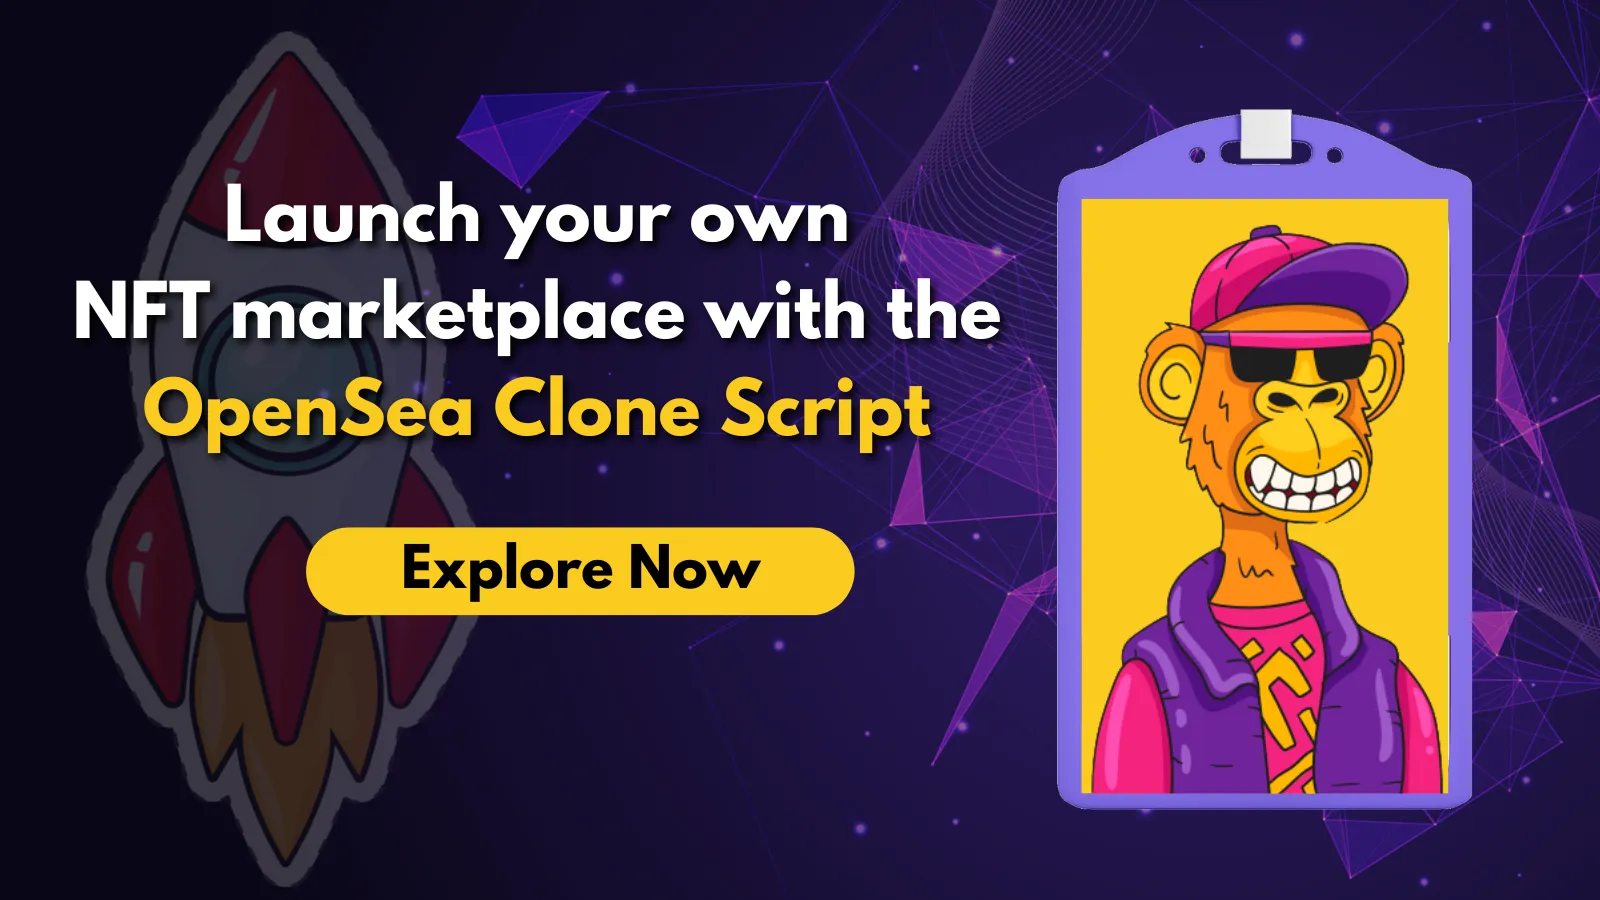 Launch your own NFT marketplace with the OpenSea Clone Script